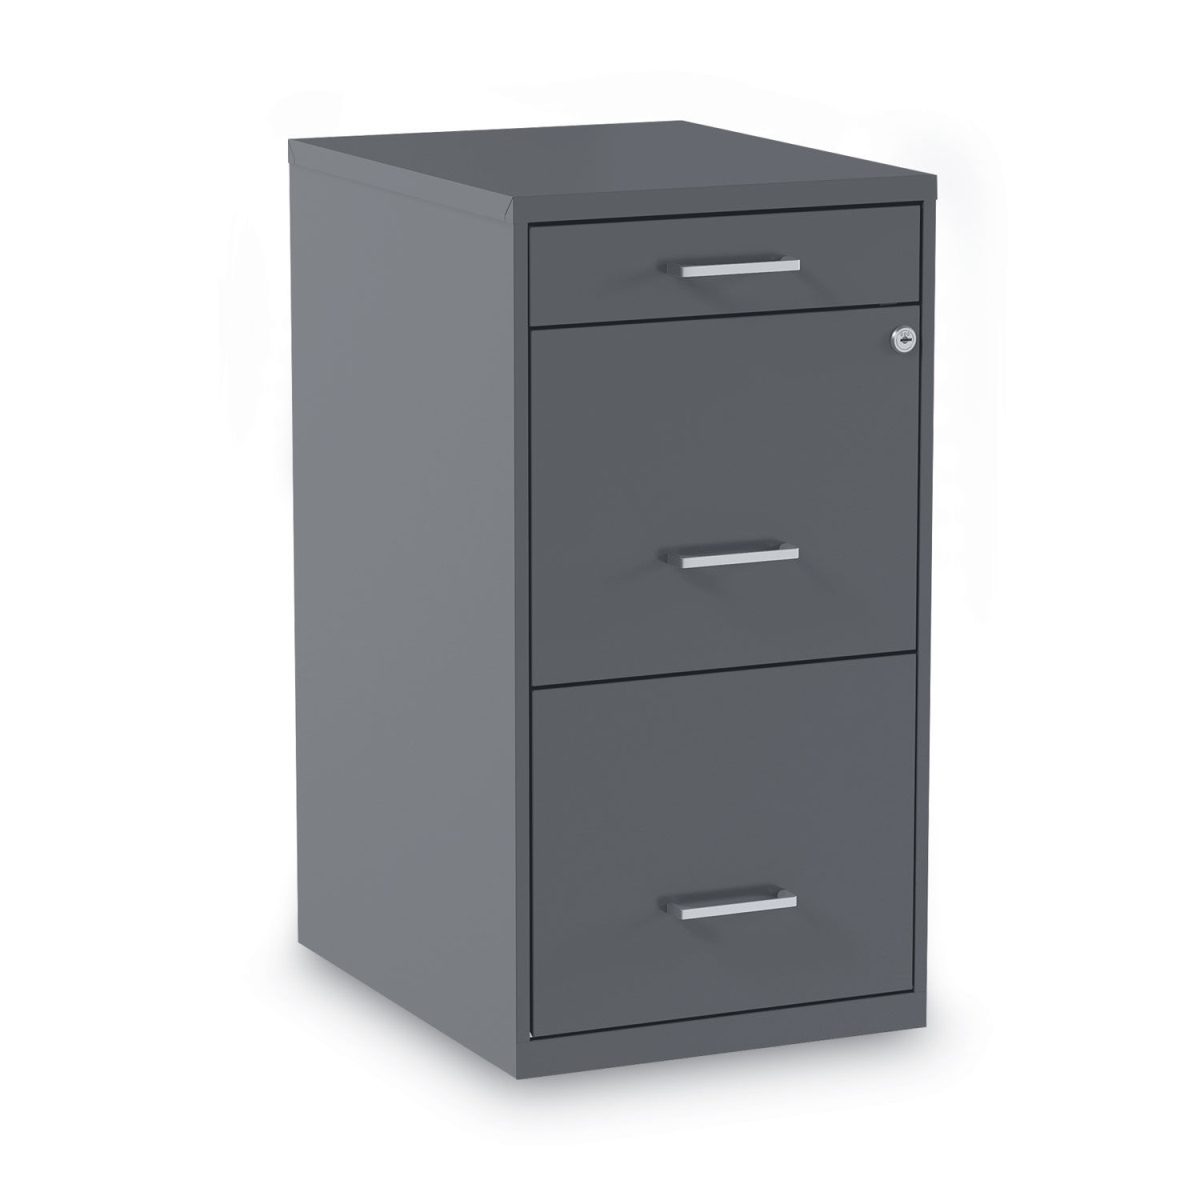 UPC 042167000103 product image for Alera 2806768 Letter Size 3 Drawers Soho Vertical File Cabinet, Charcoal | upcitemdb.com